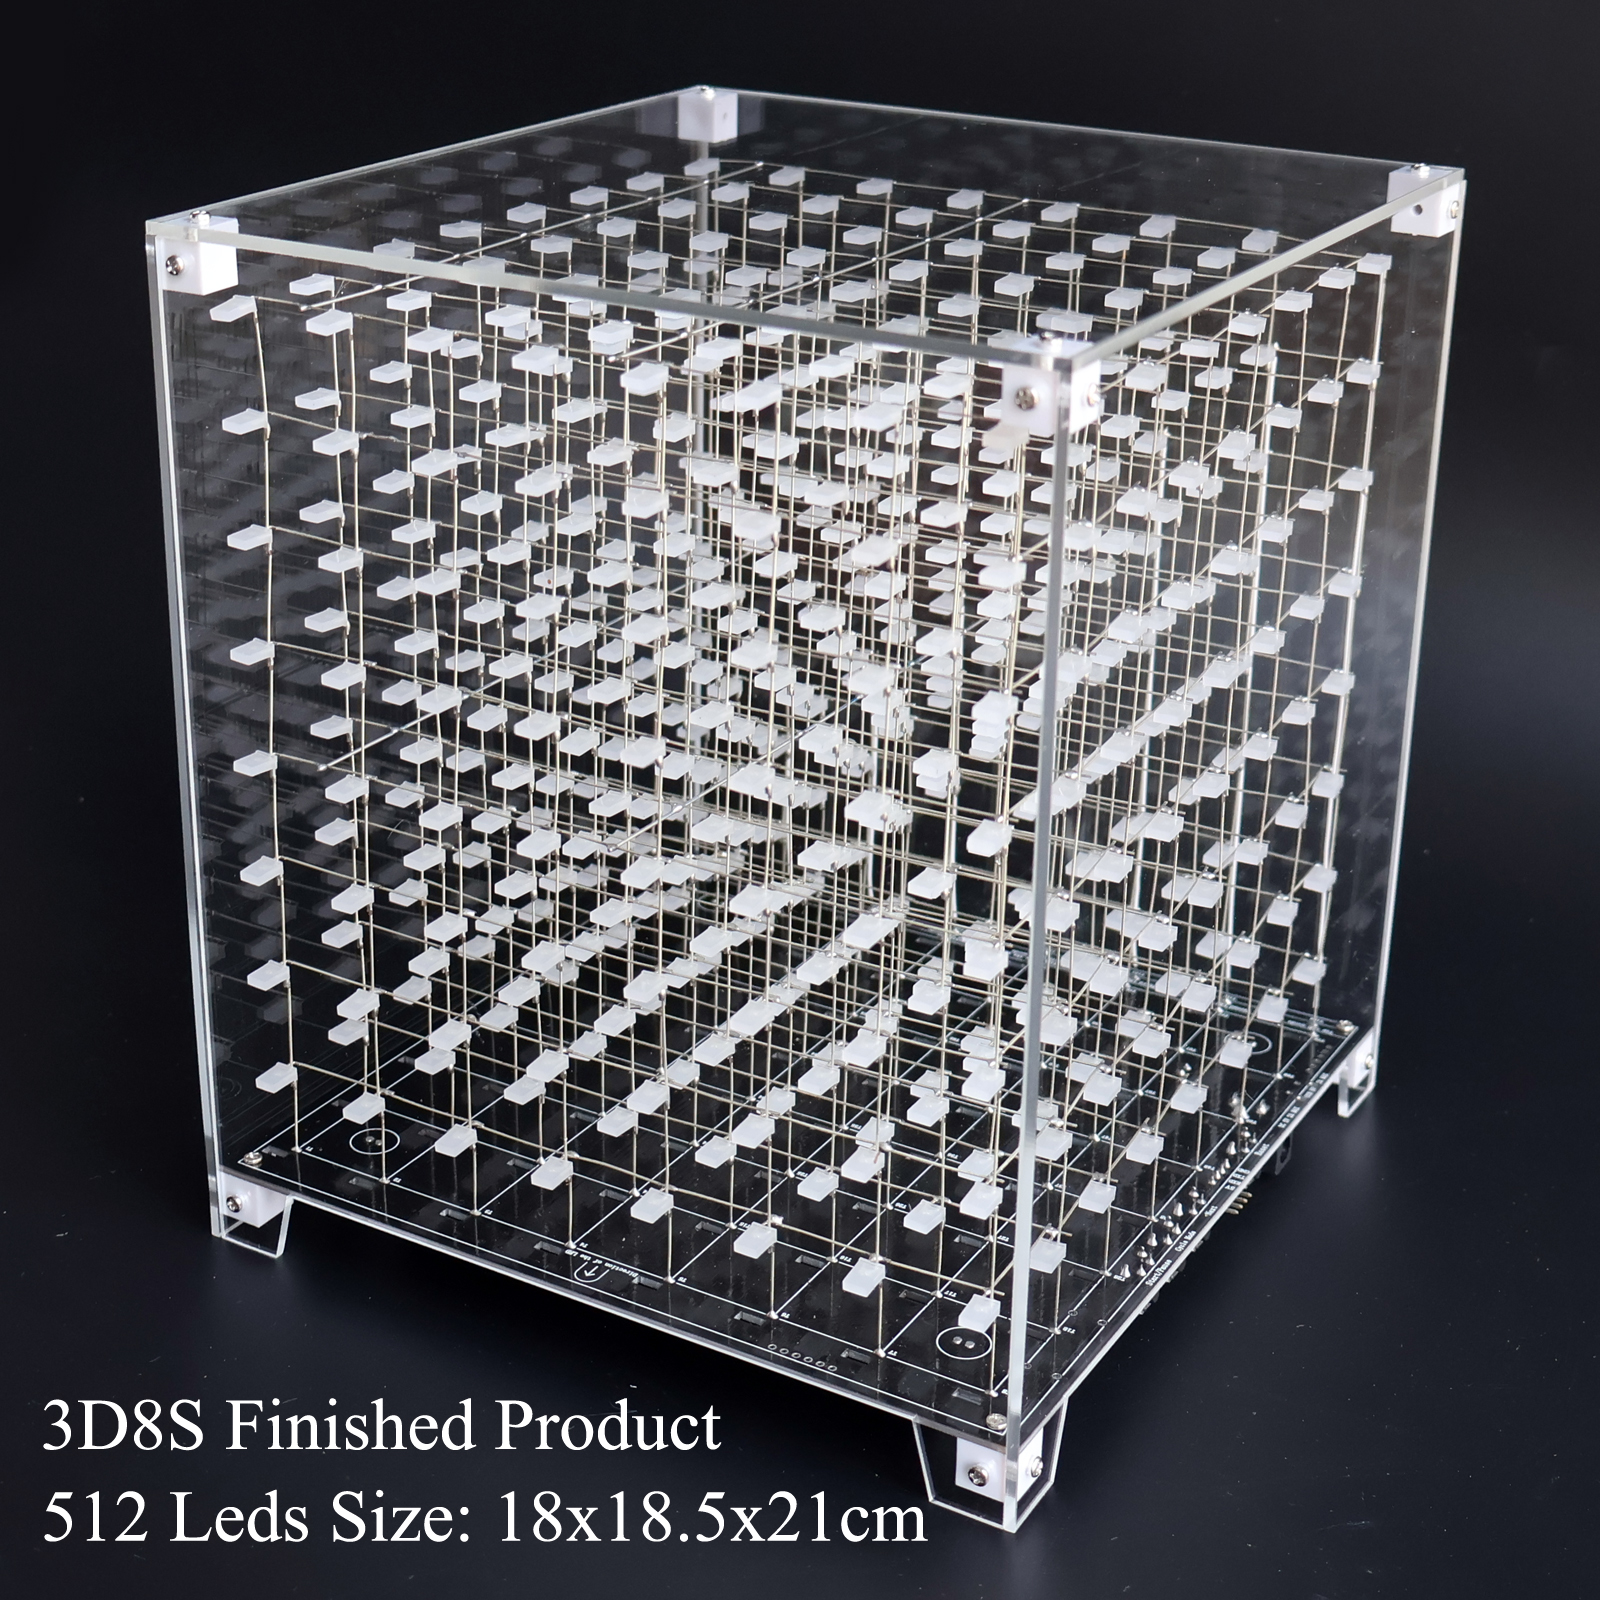 Finished product - iCubeSmart 3D8S Led Cube, No Welding By Buyer